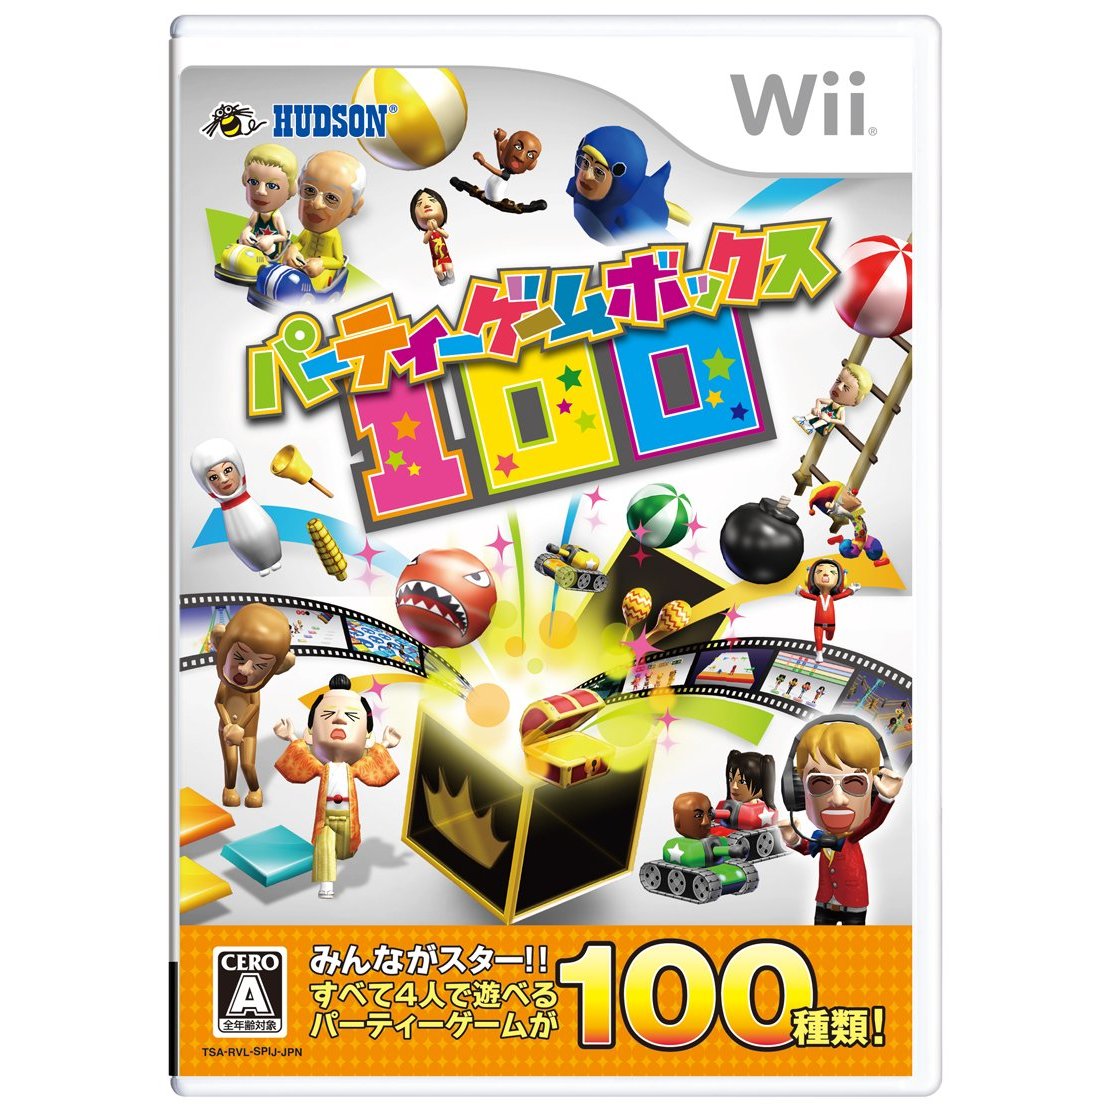 games you can download on the wii